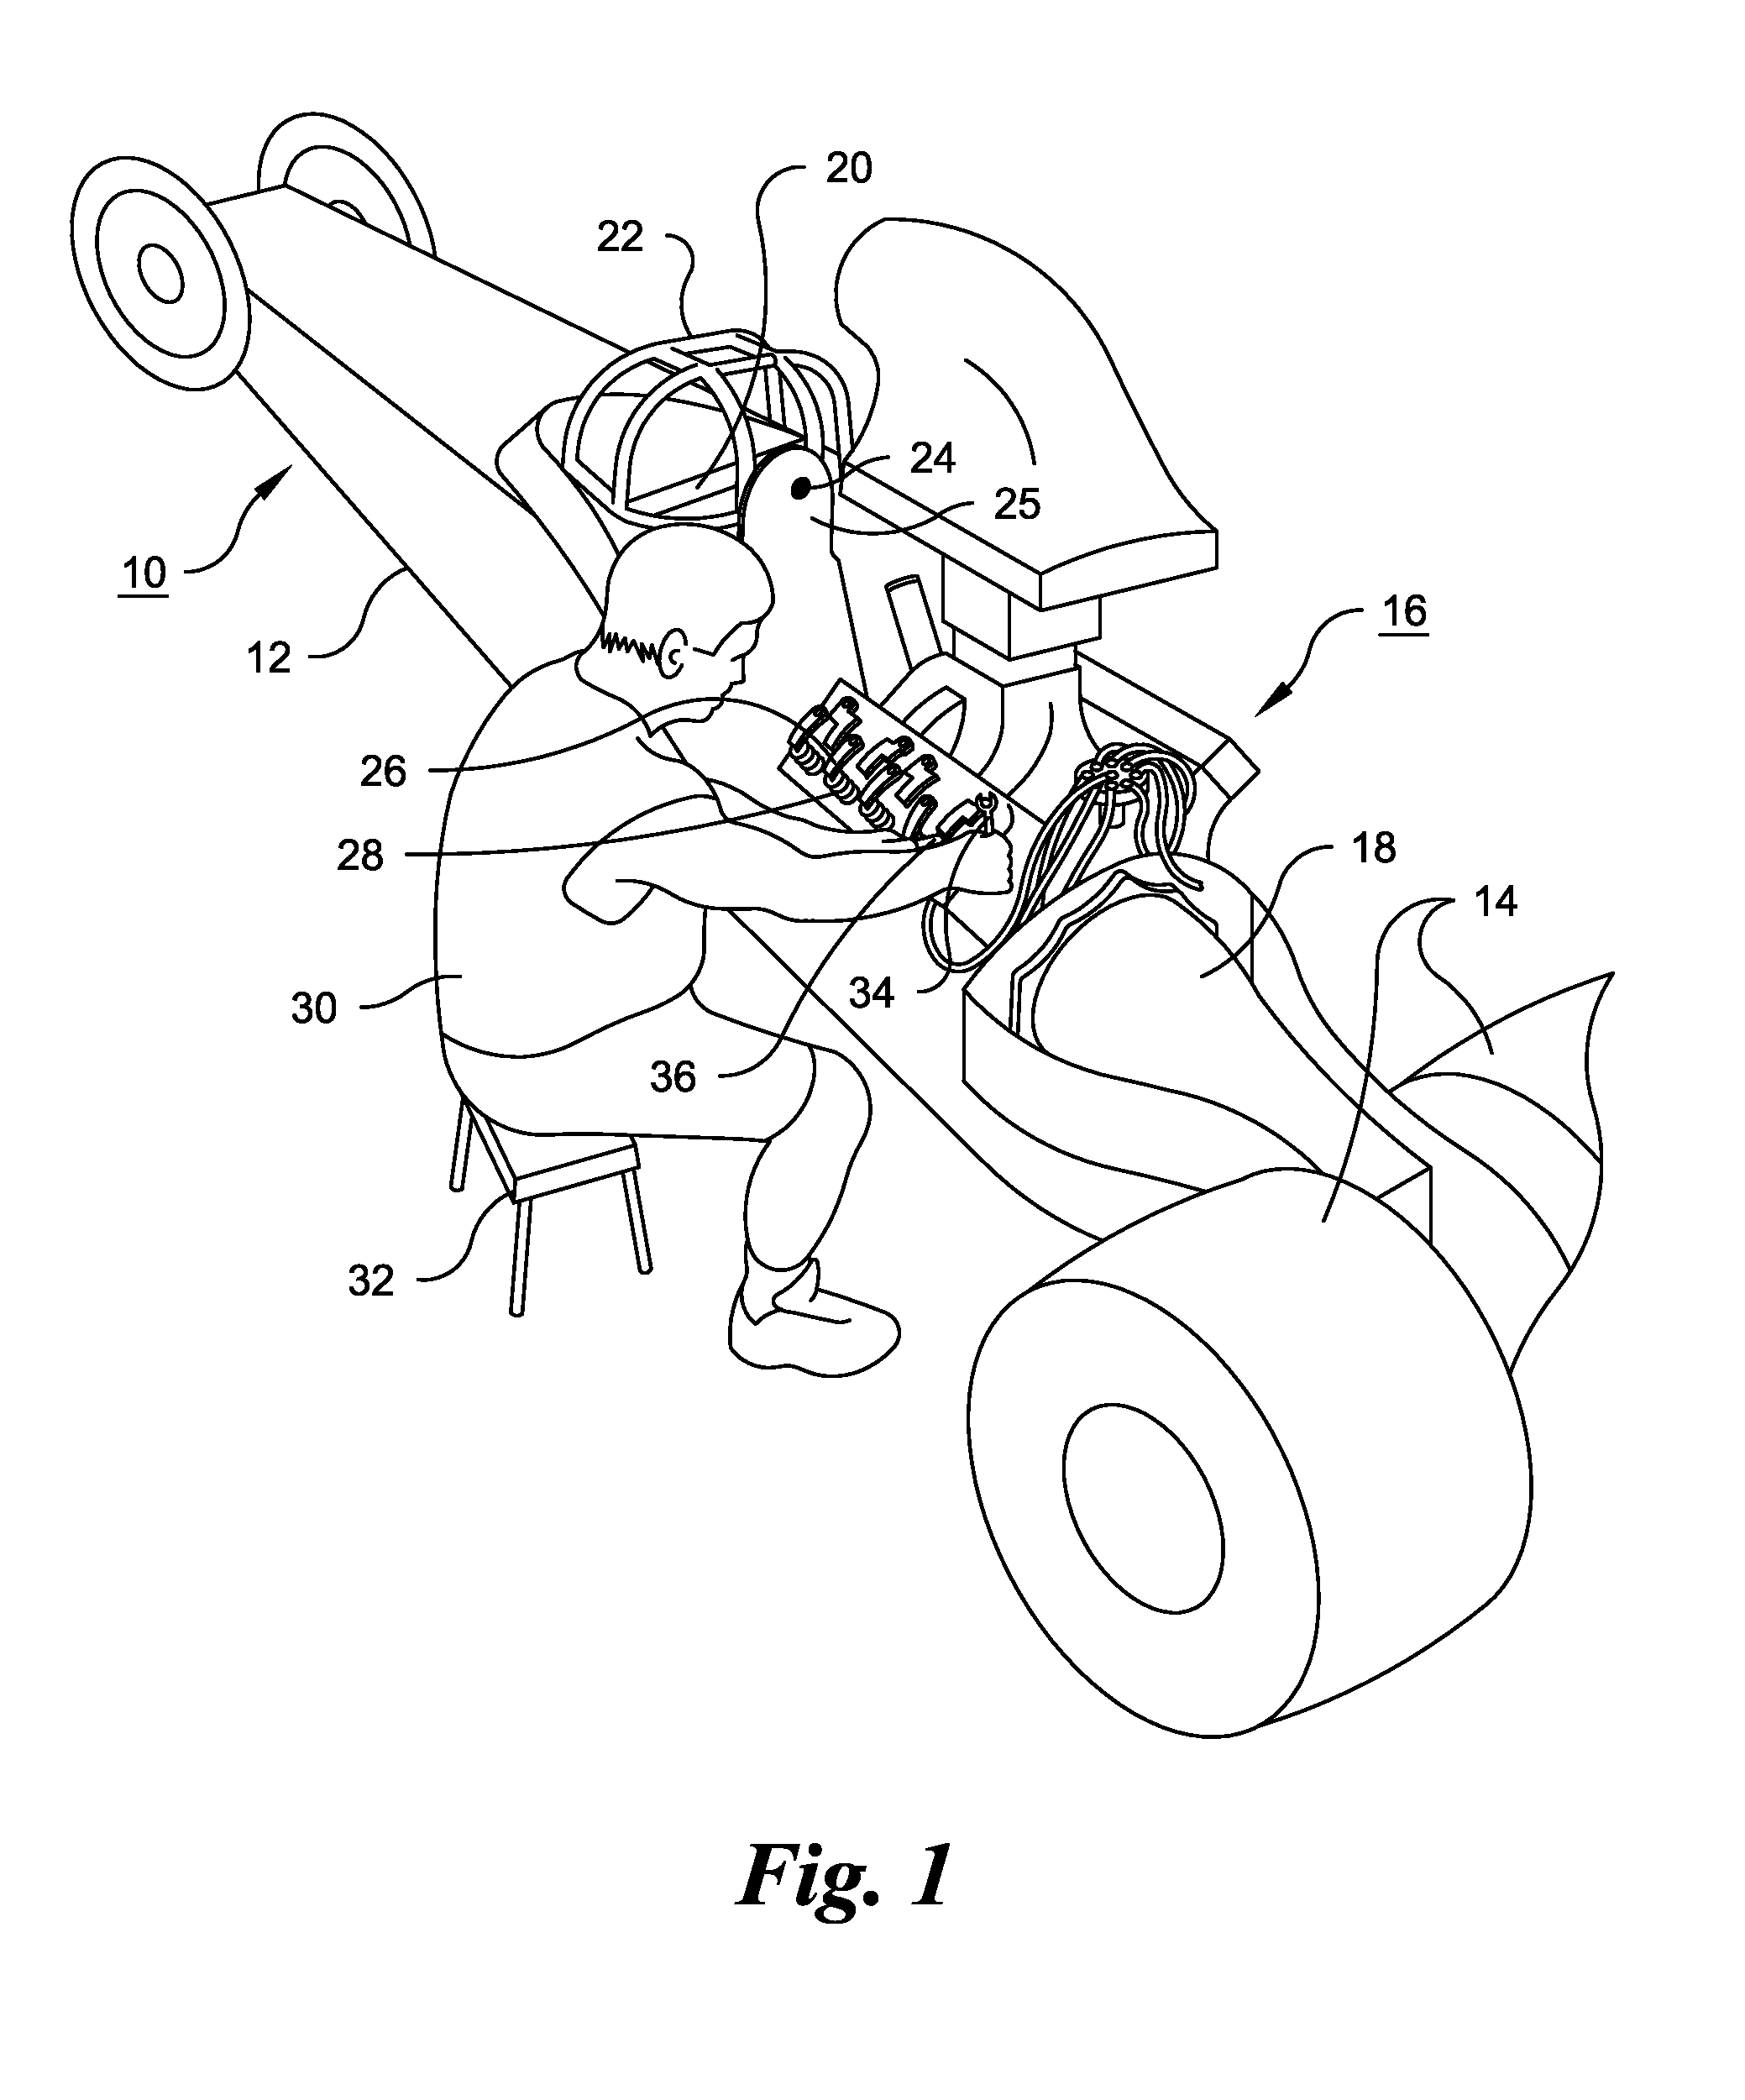 Tuning an overhead valve internal combustion engine